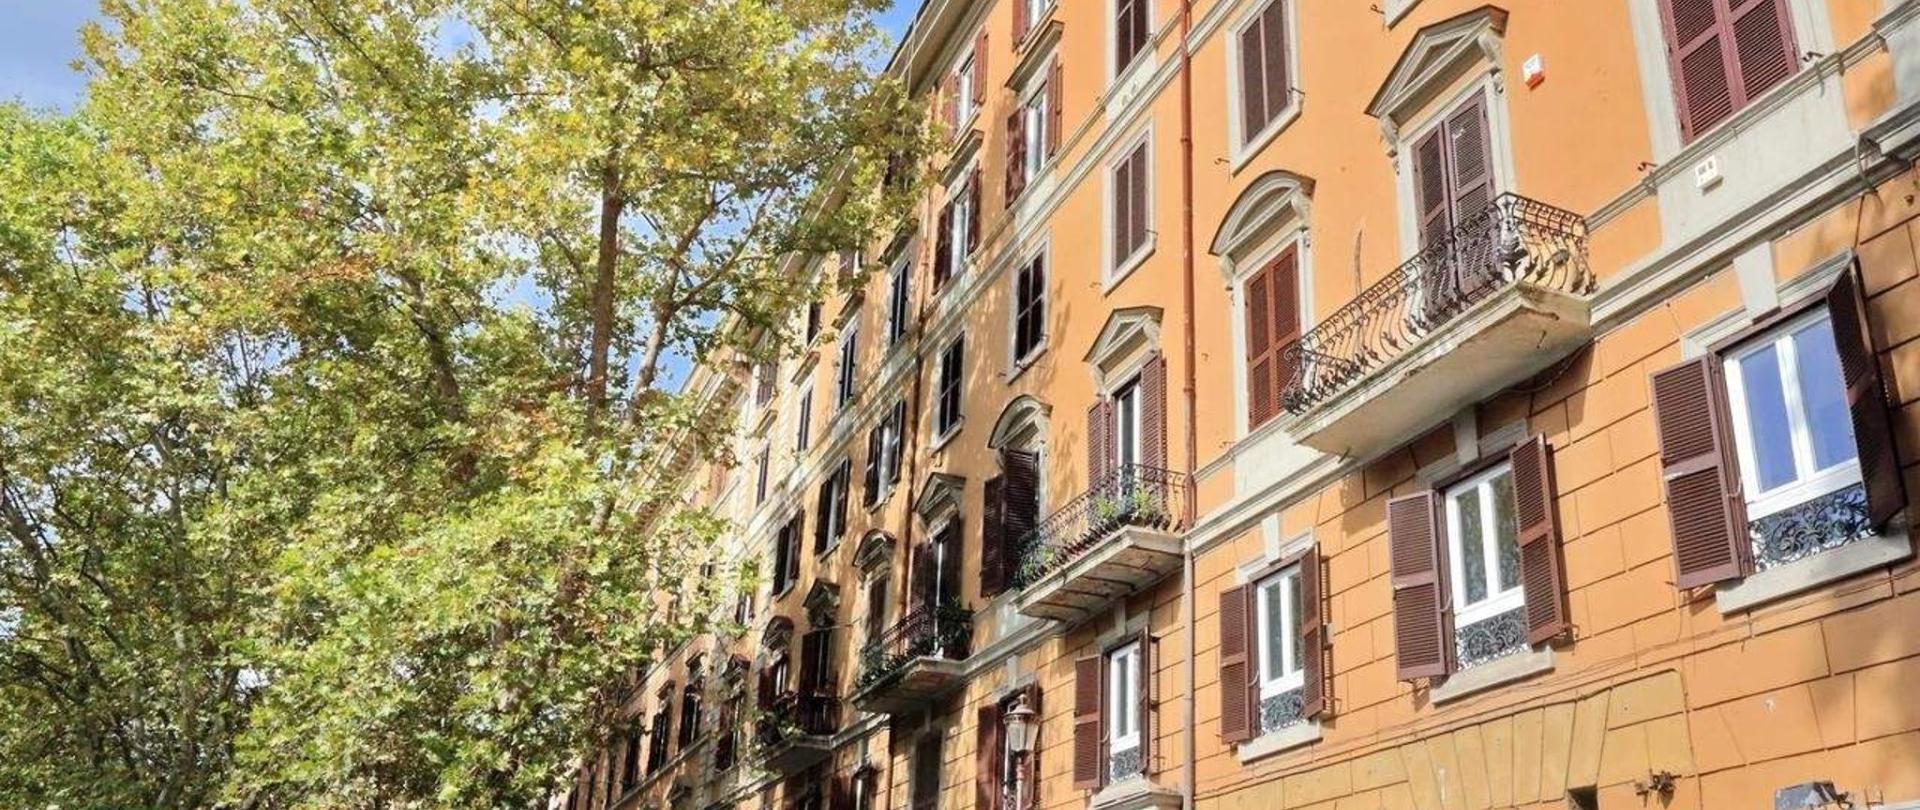 Discount [70% Off] Guest House Rome Italy | Hotel Jobs Hiring Near Me